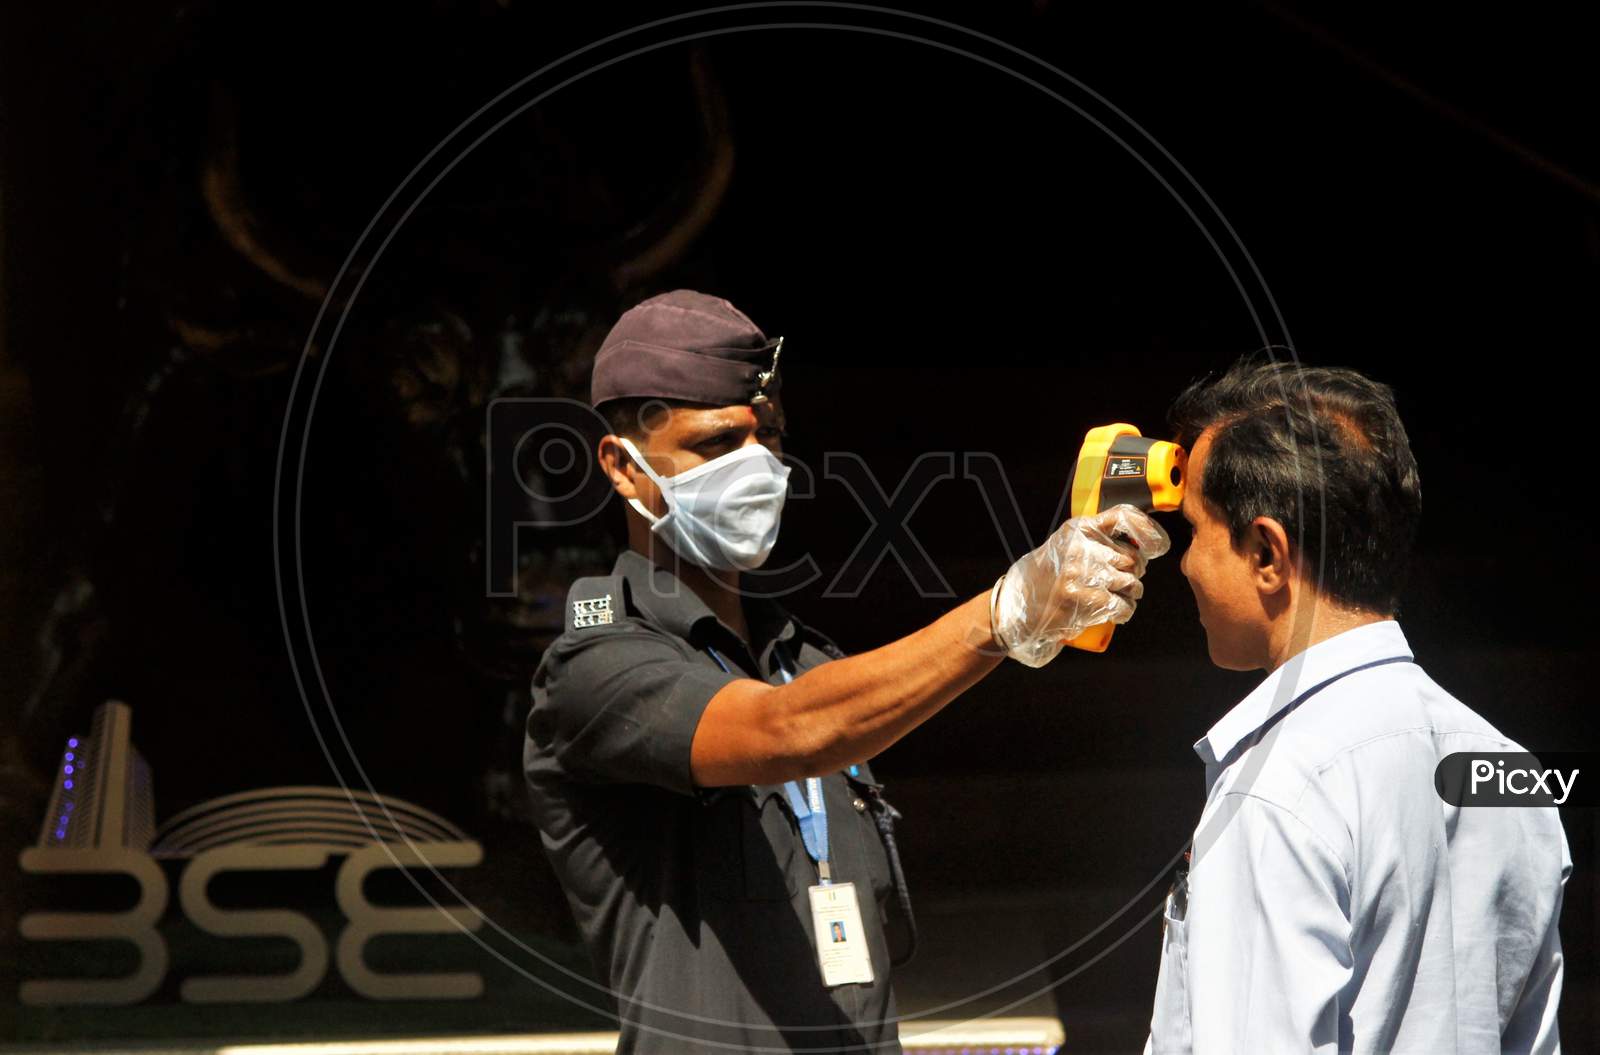 A security official scans a visitor with an infrared thermometer to check his temperature as a precautionary measure against coronavirus outside the Bombay Stock Exchange (BSE) in Mumbai, India March 16, 2020.